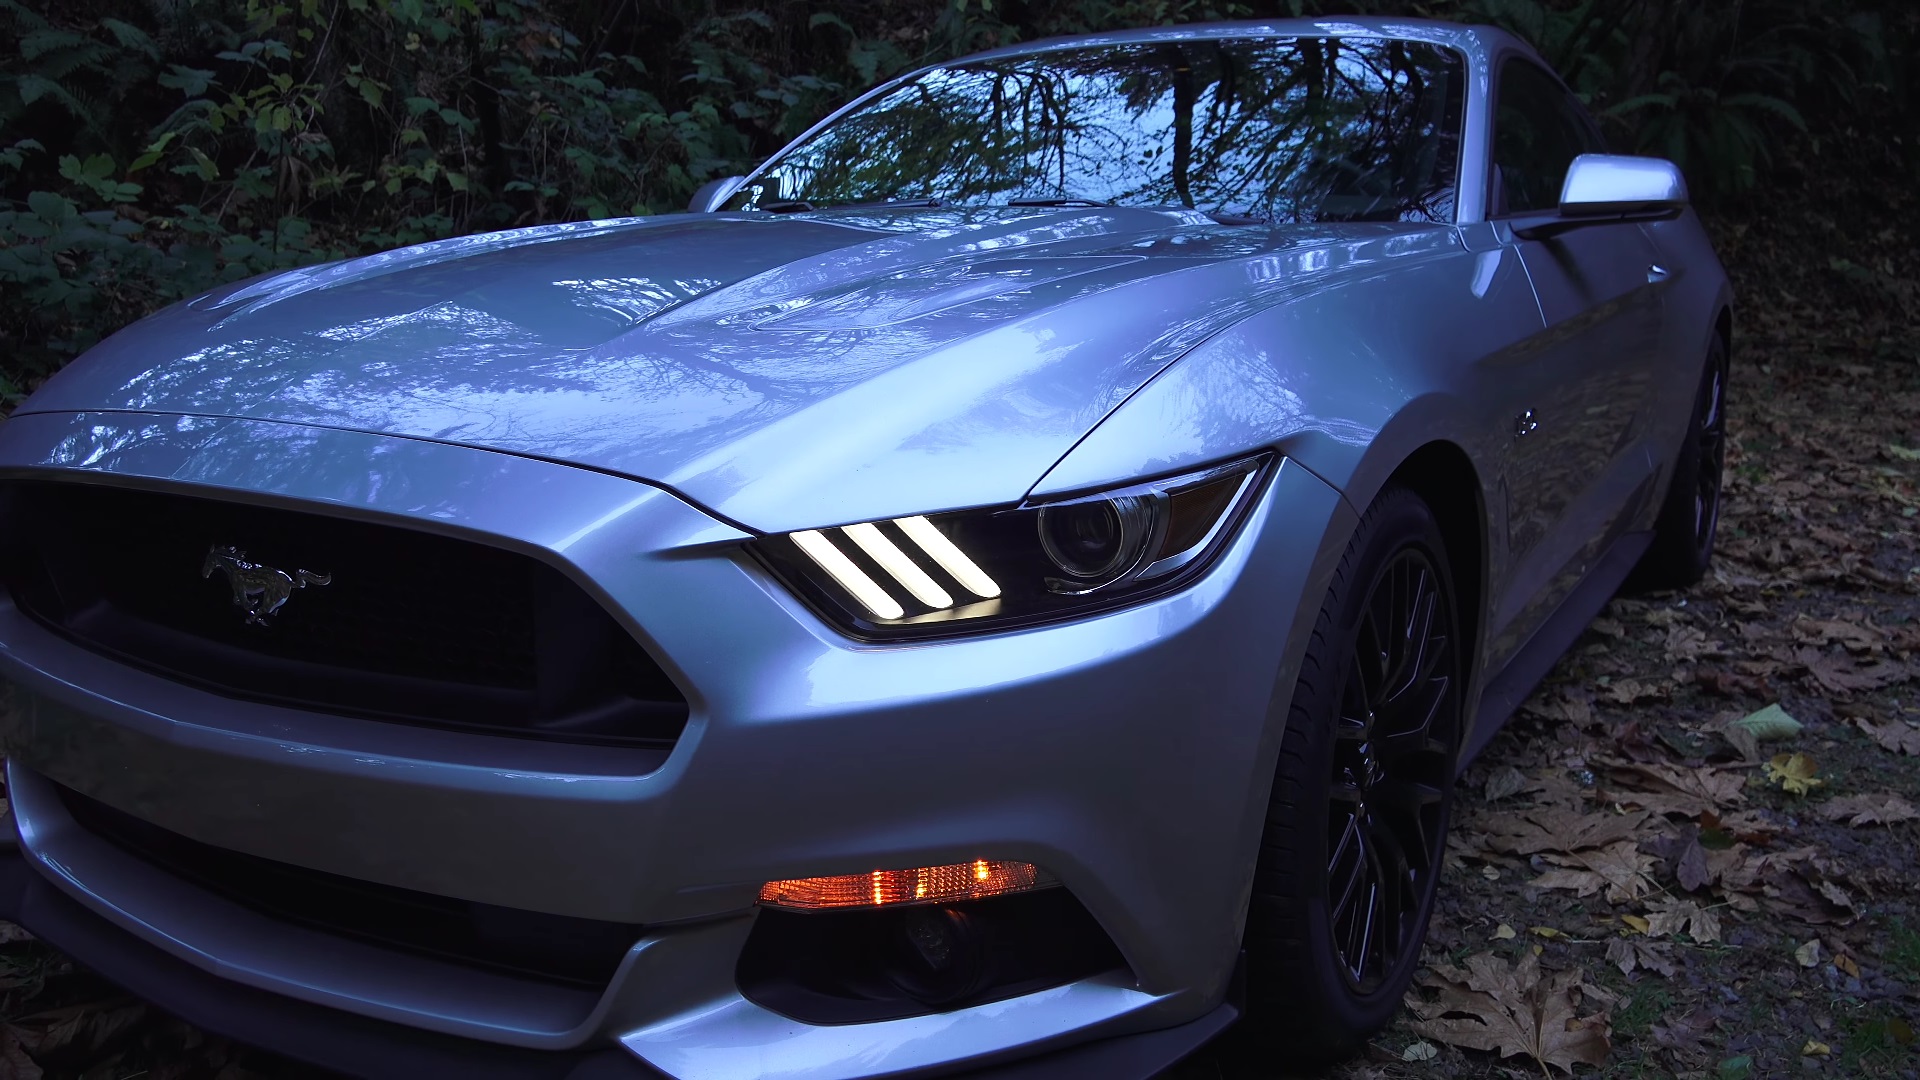 Video: 2015 Ford Mustang GT Premium - Review & Test Drive